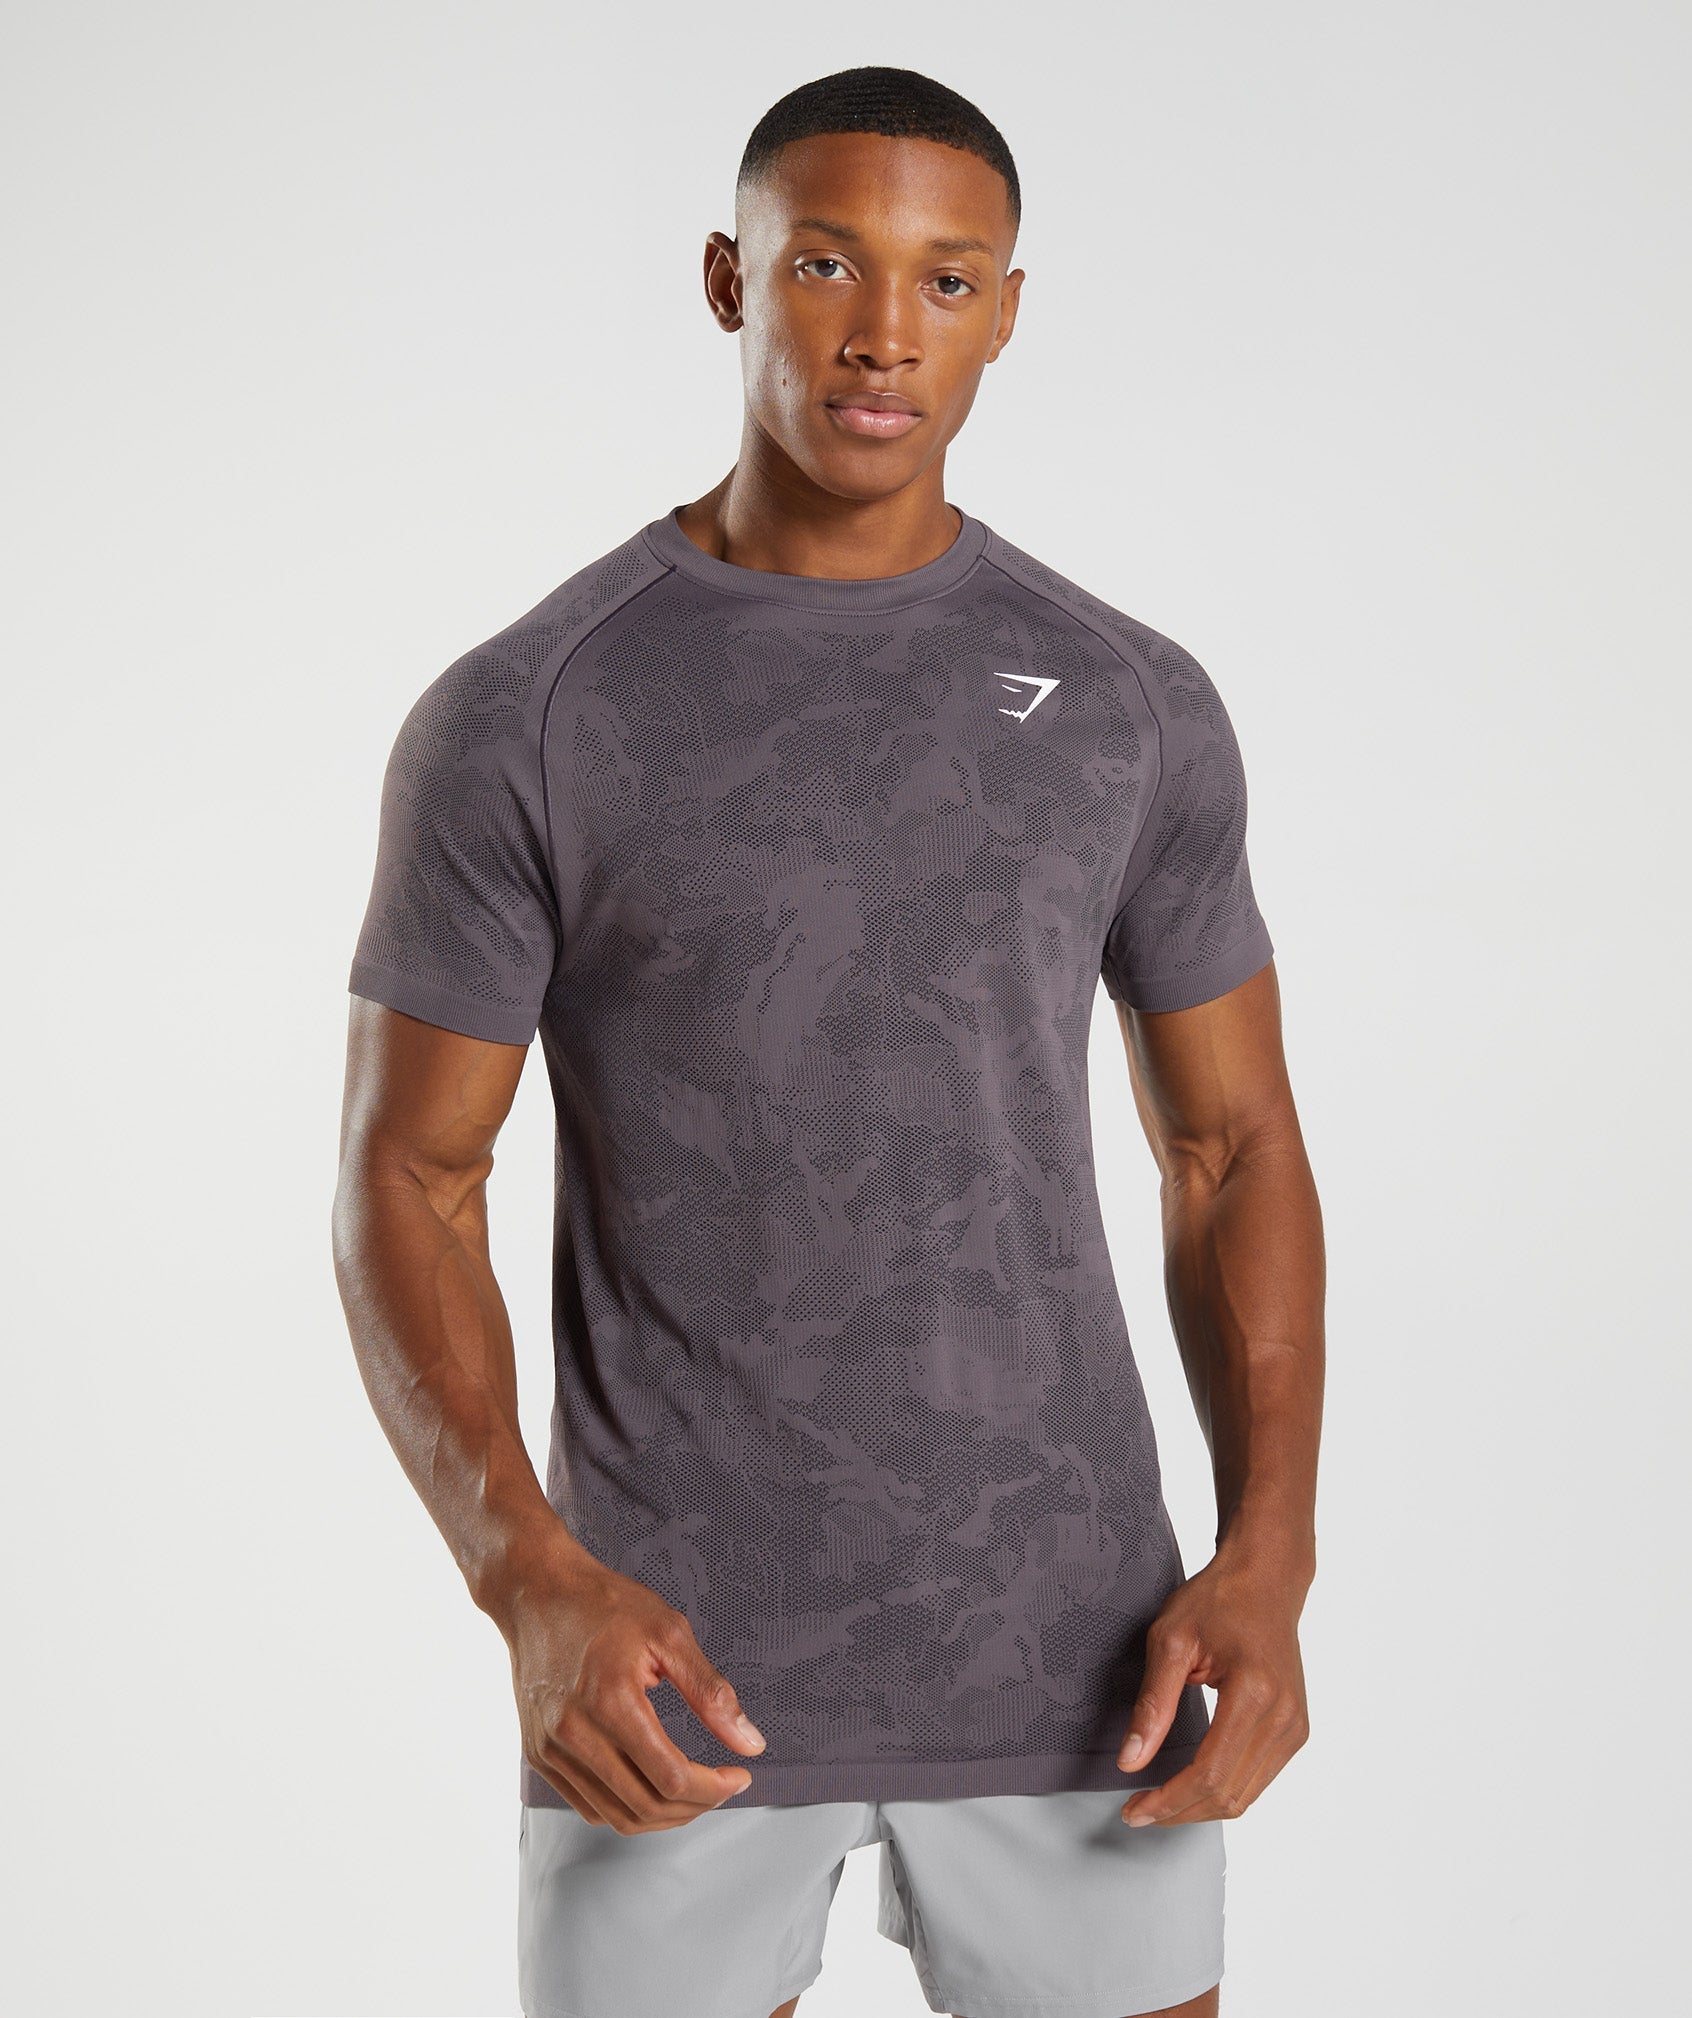 Geo Seamless T-Shirt in Musk Lilac/Black - view 1